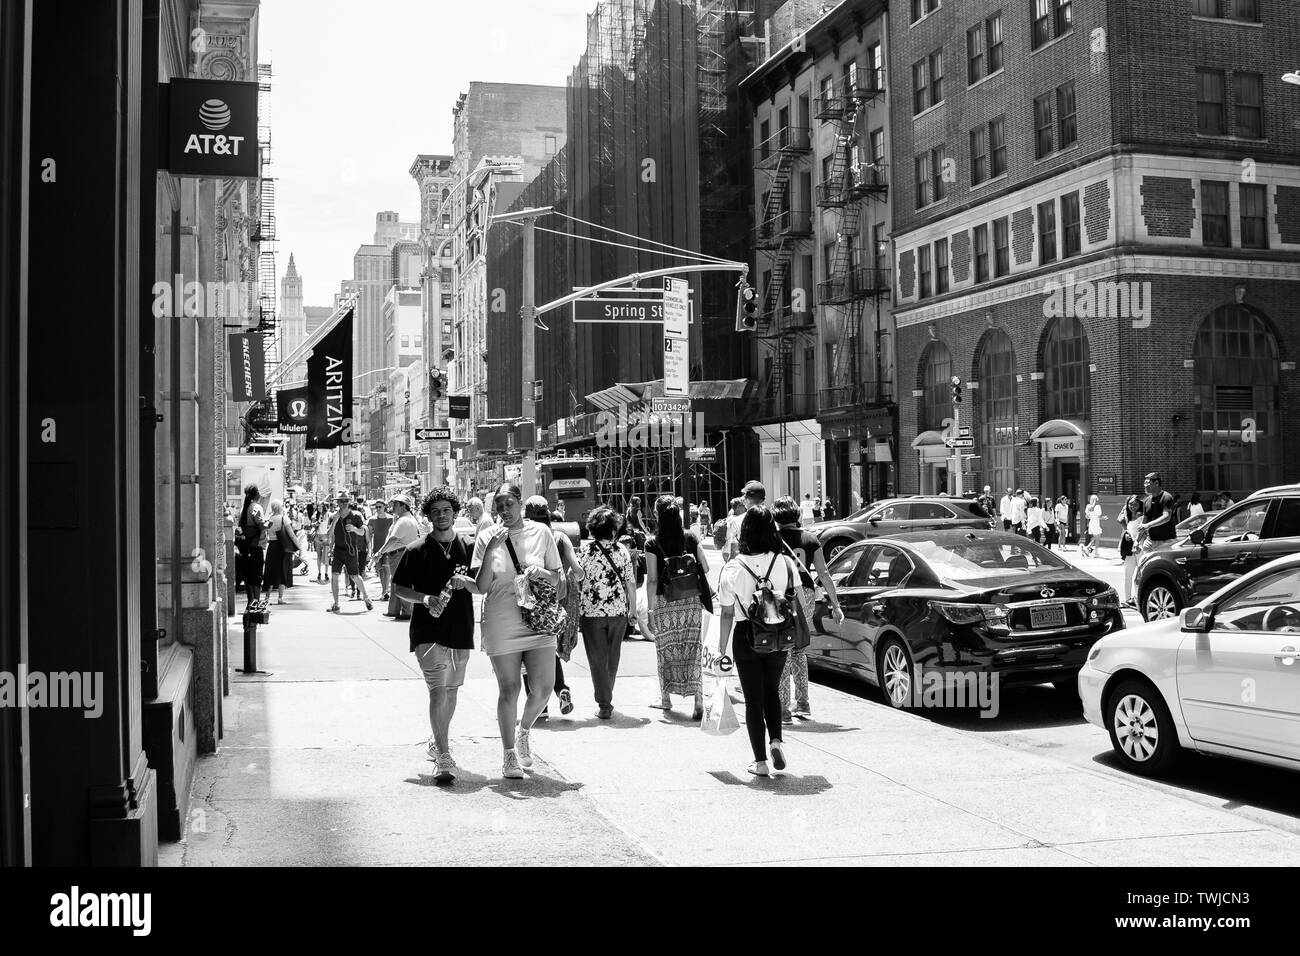 New York, 6/15/2019: People walk along Brodway near Spring Street on a Saturday afternoon. Stock Photo